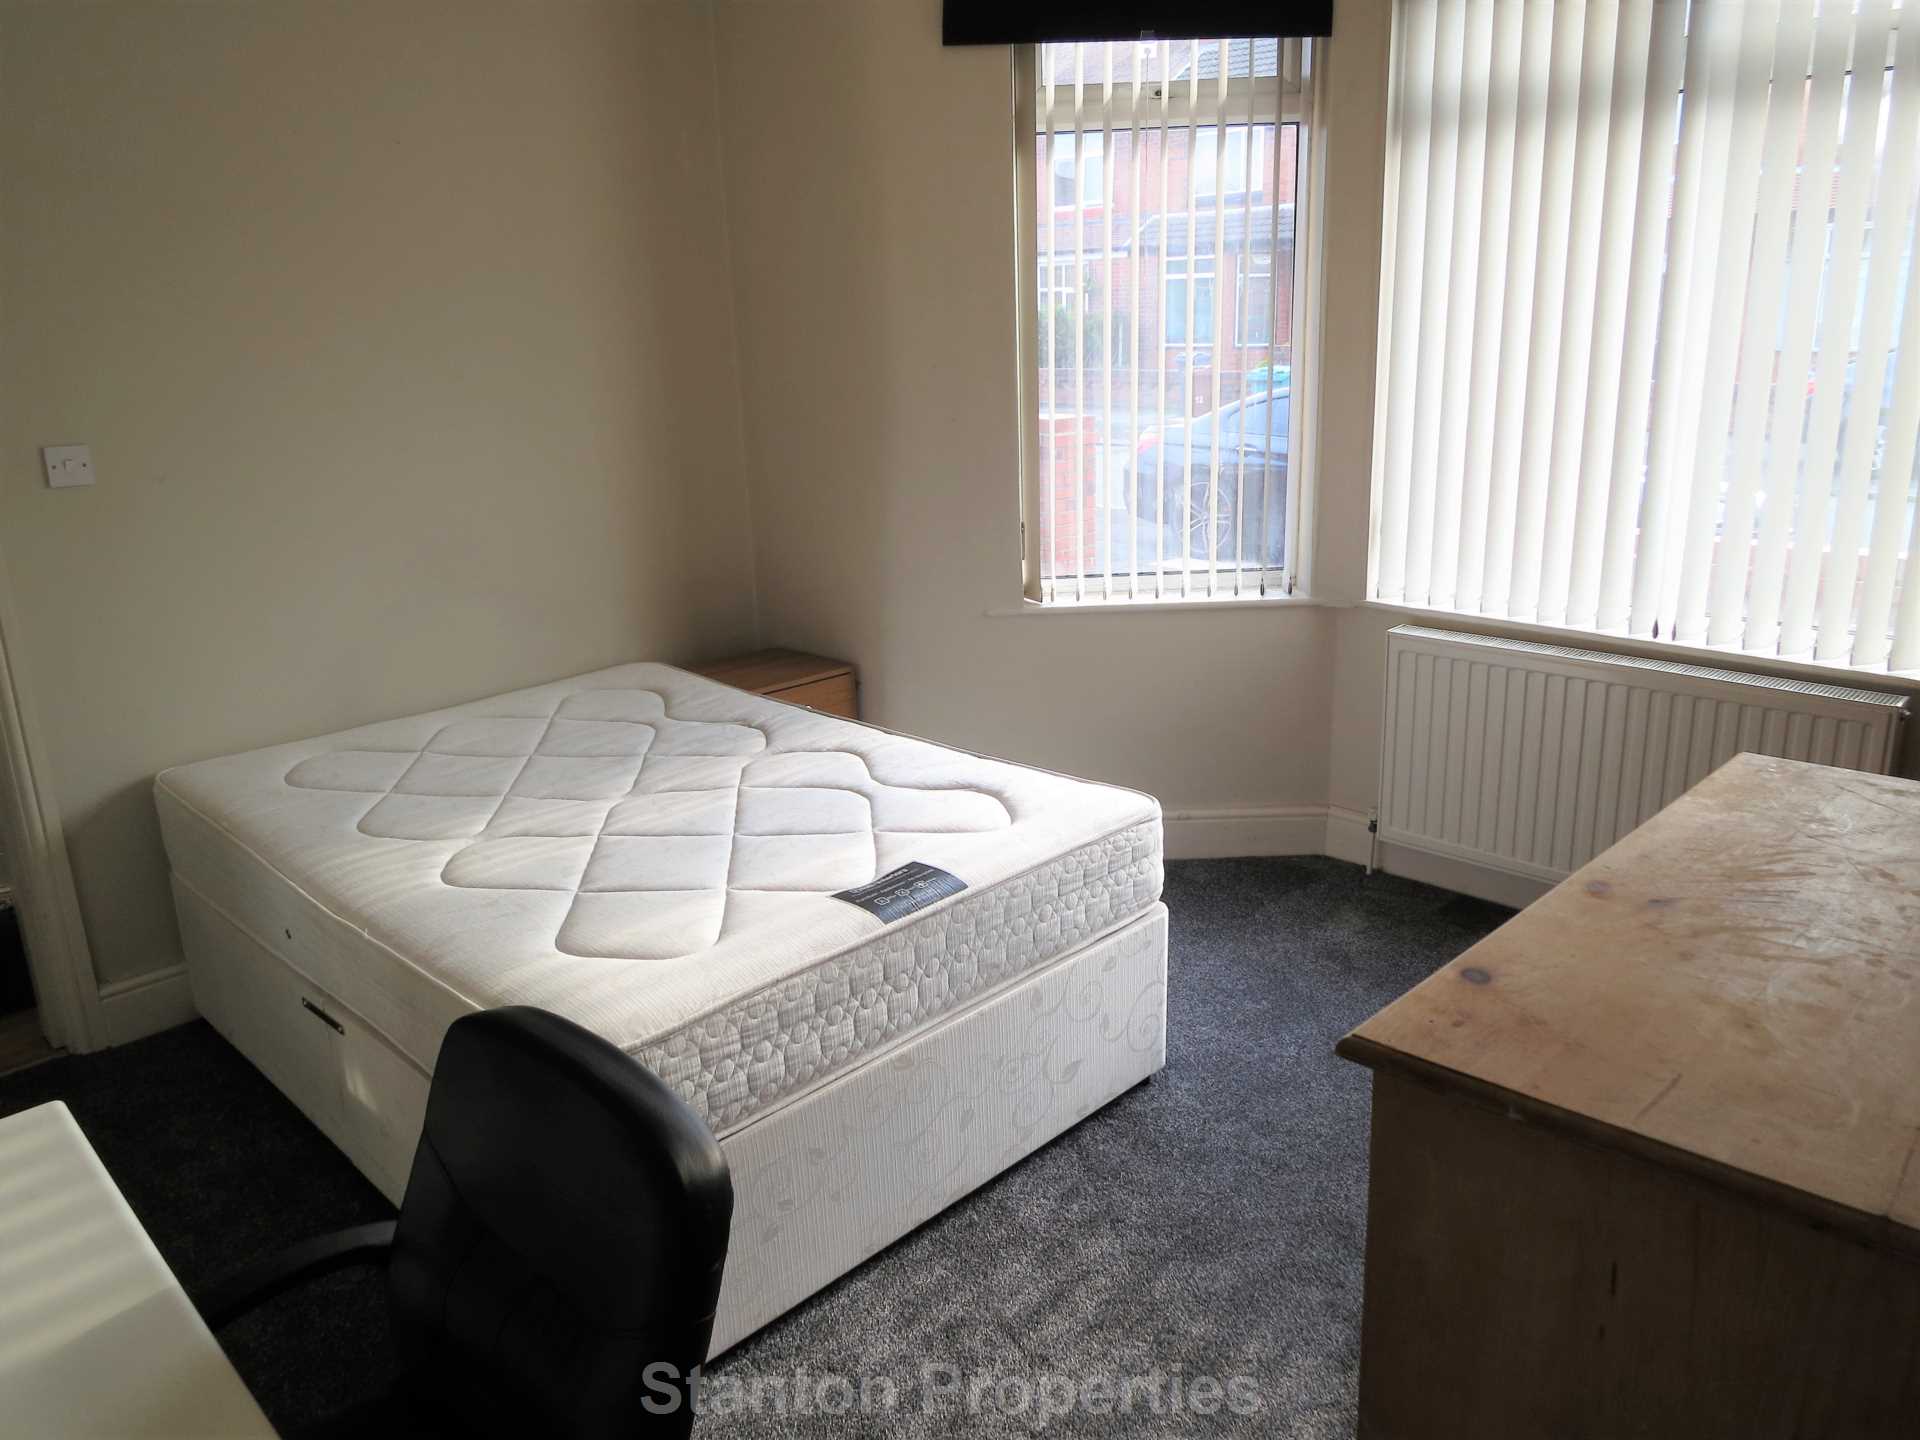 See Video Tour, £135 pppw, Brocklebank Road, Fallowfield, Image 9